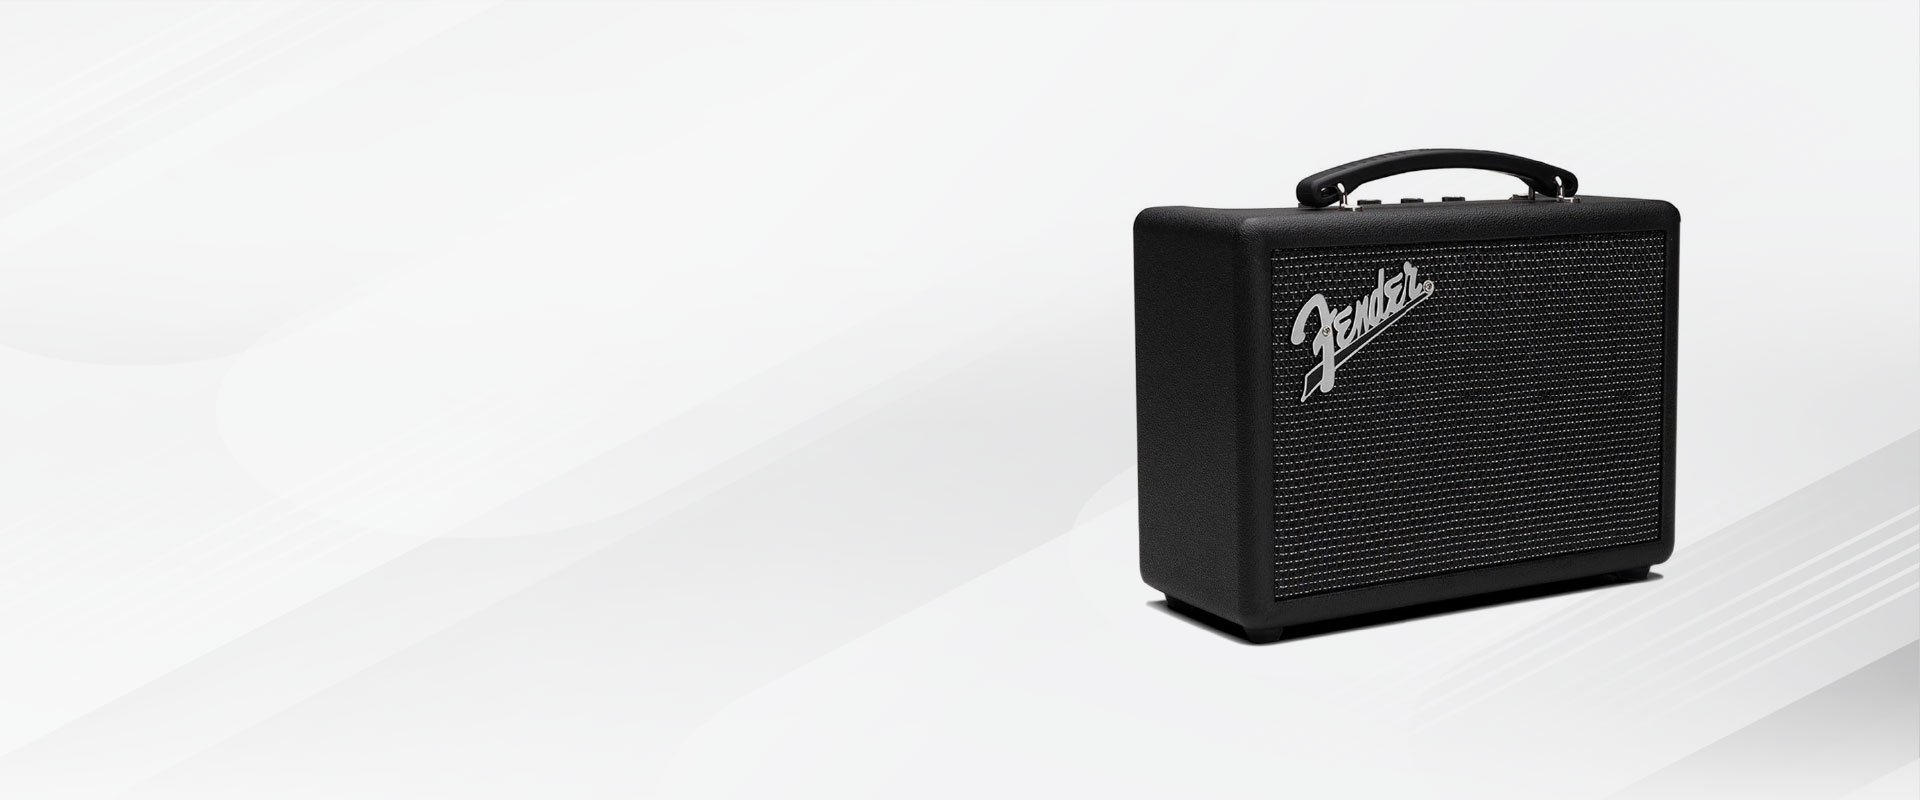 <p>Special price</p><h1>FENDER INDIO<h1><p>Wireless Speaker Tweed</p><p><a class="btn" href="/">SHOP NOW</a></p>